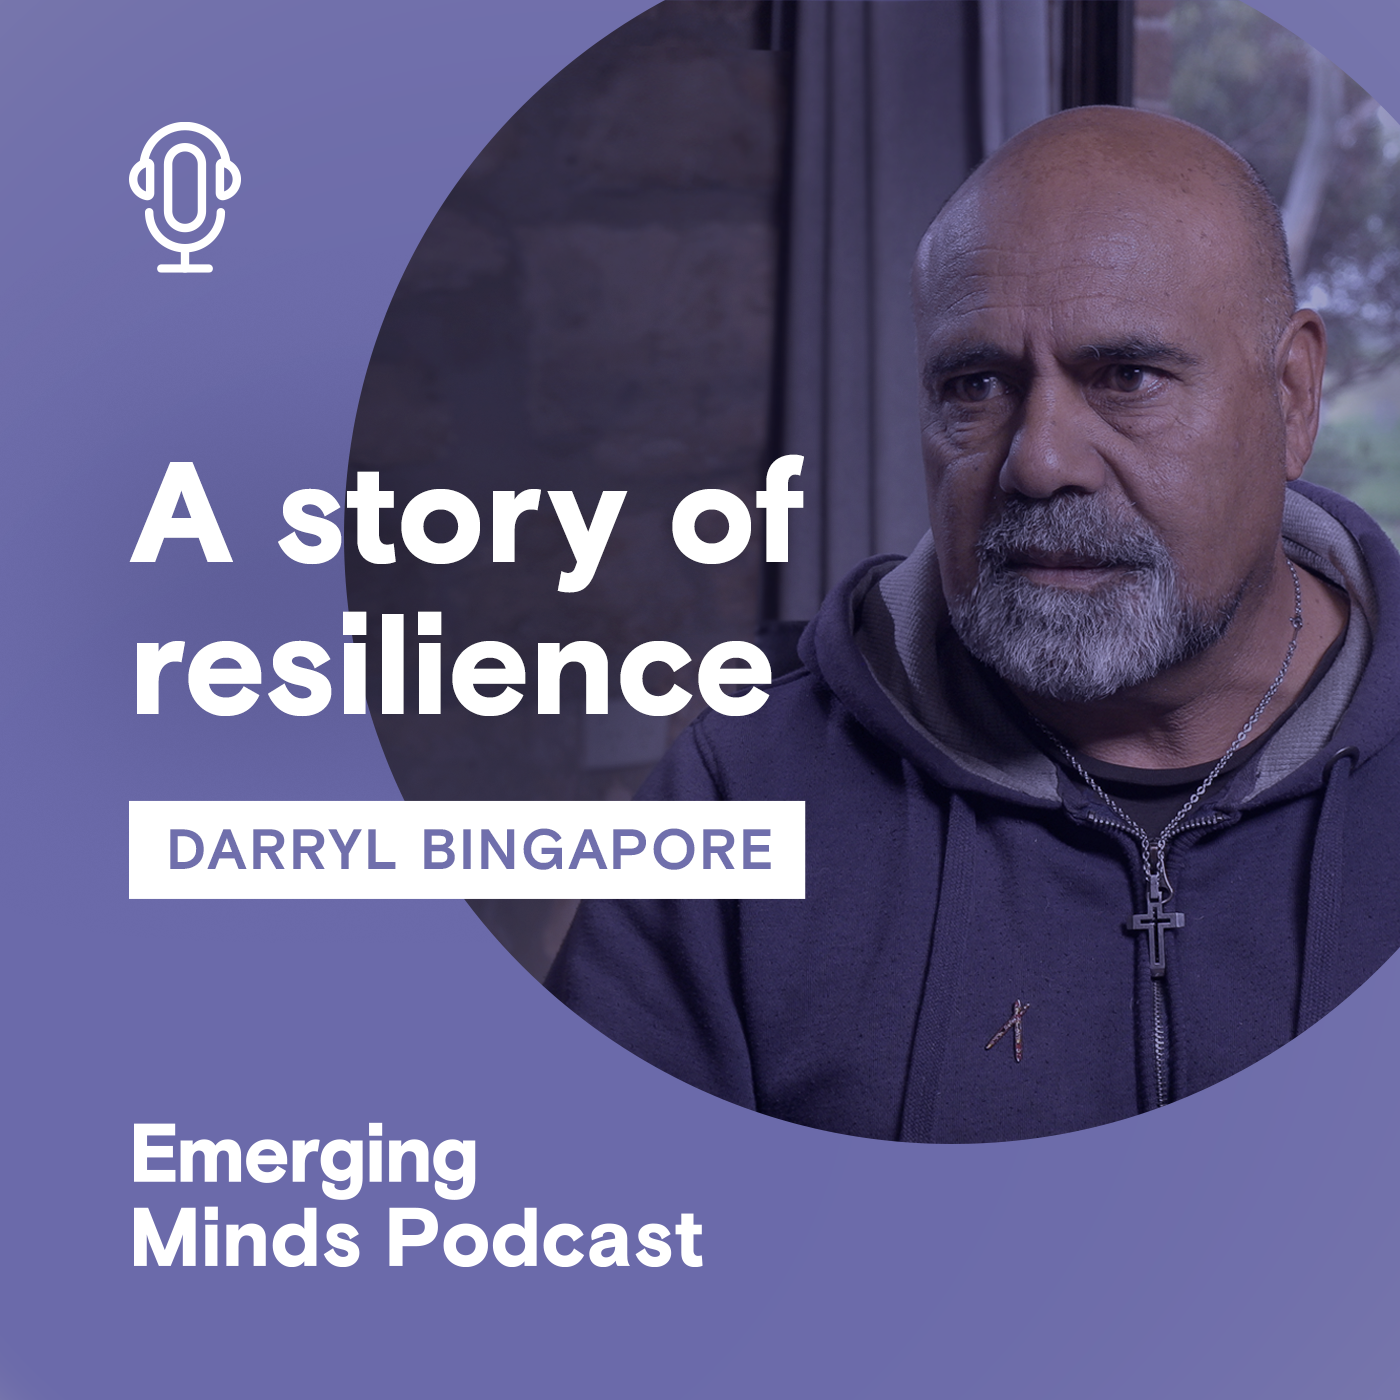 A story of resilience